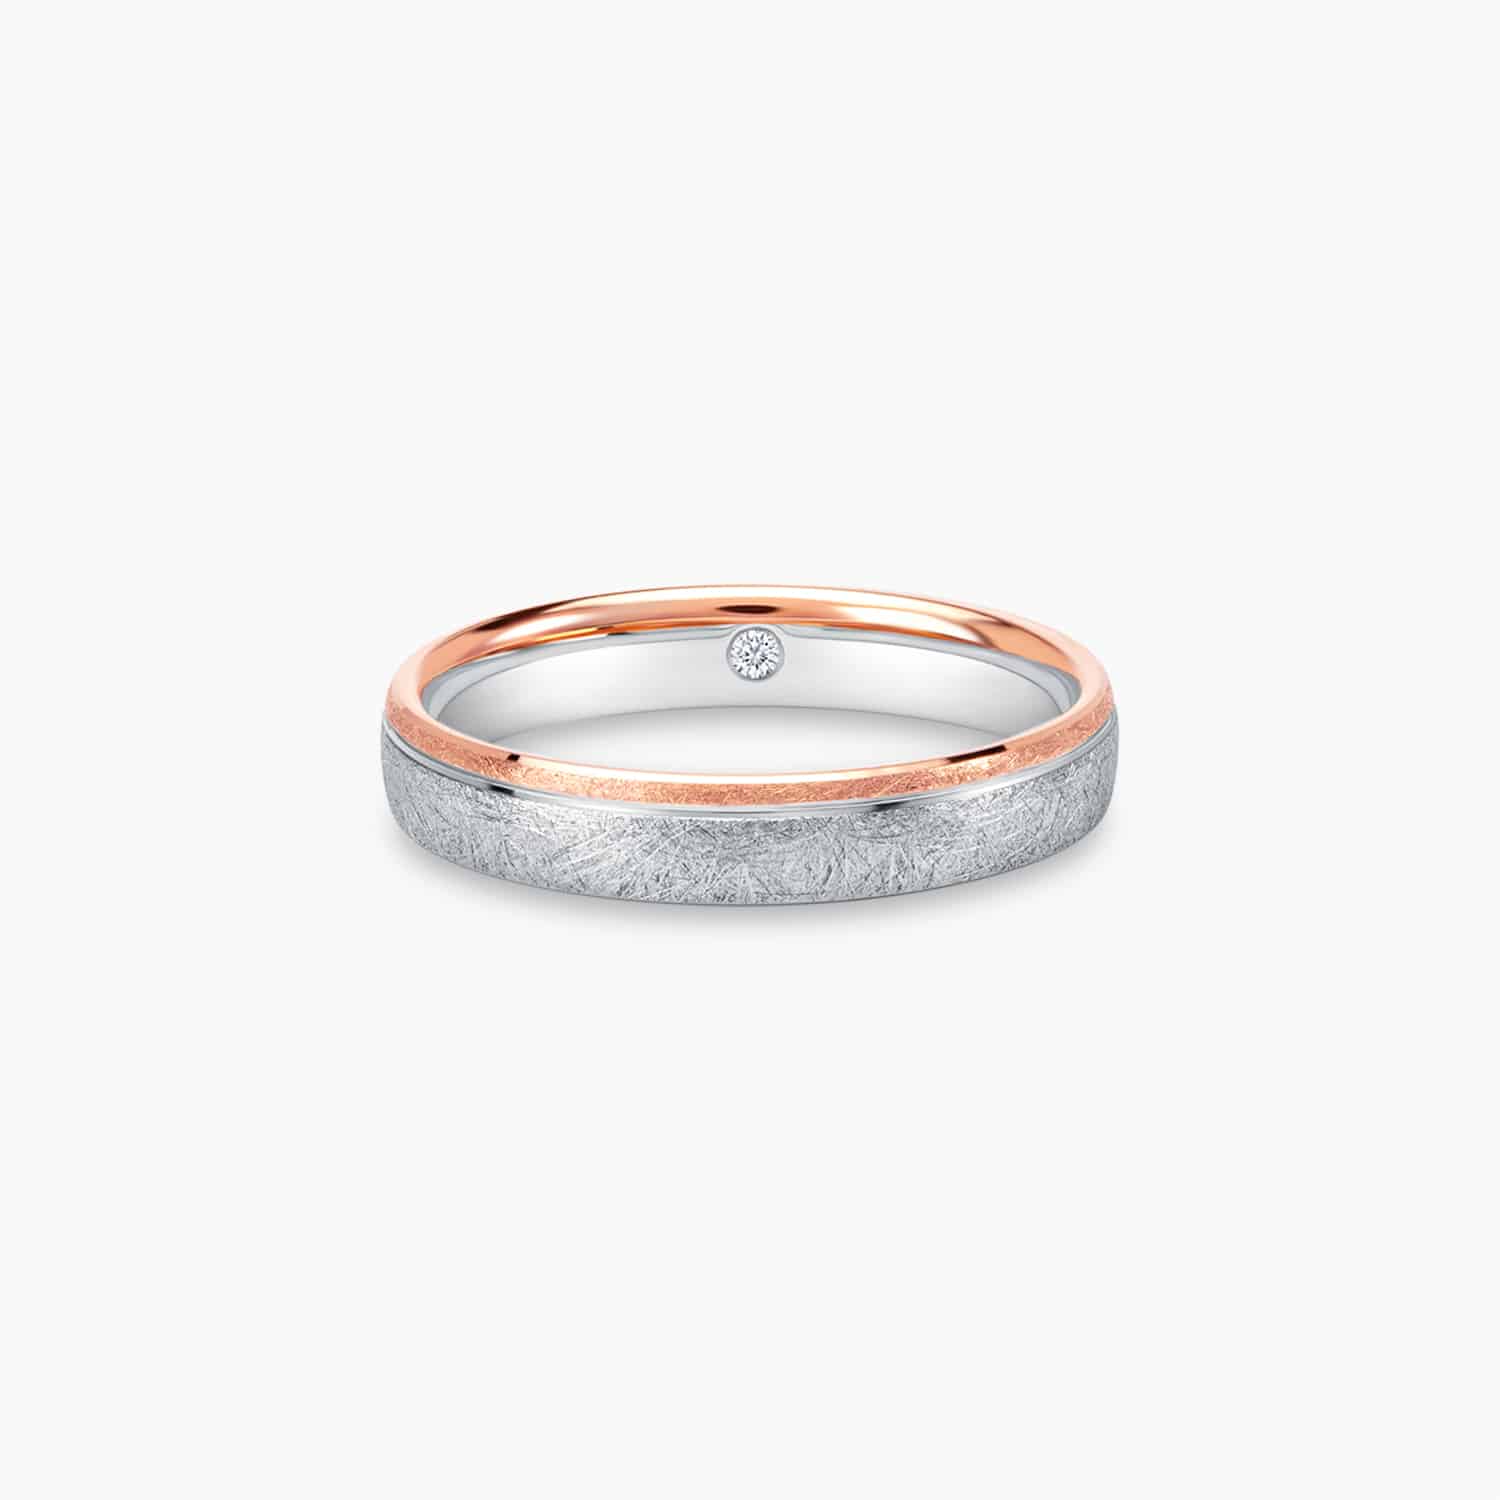 LVC SOLEIL WEDDING BAND IN WHITE AND ROSE GOLD WITH AN INNER DIAMOND a wedding band for men in rose and white gold with one diamond 钻石 戒指 cincin diamond